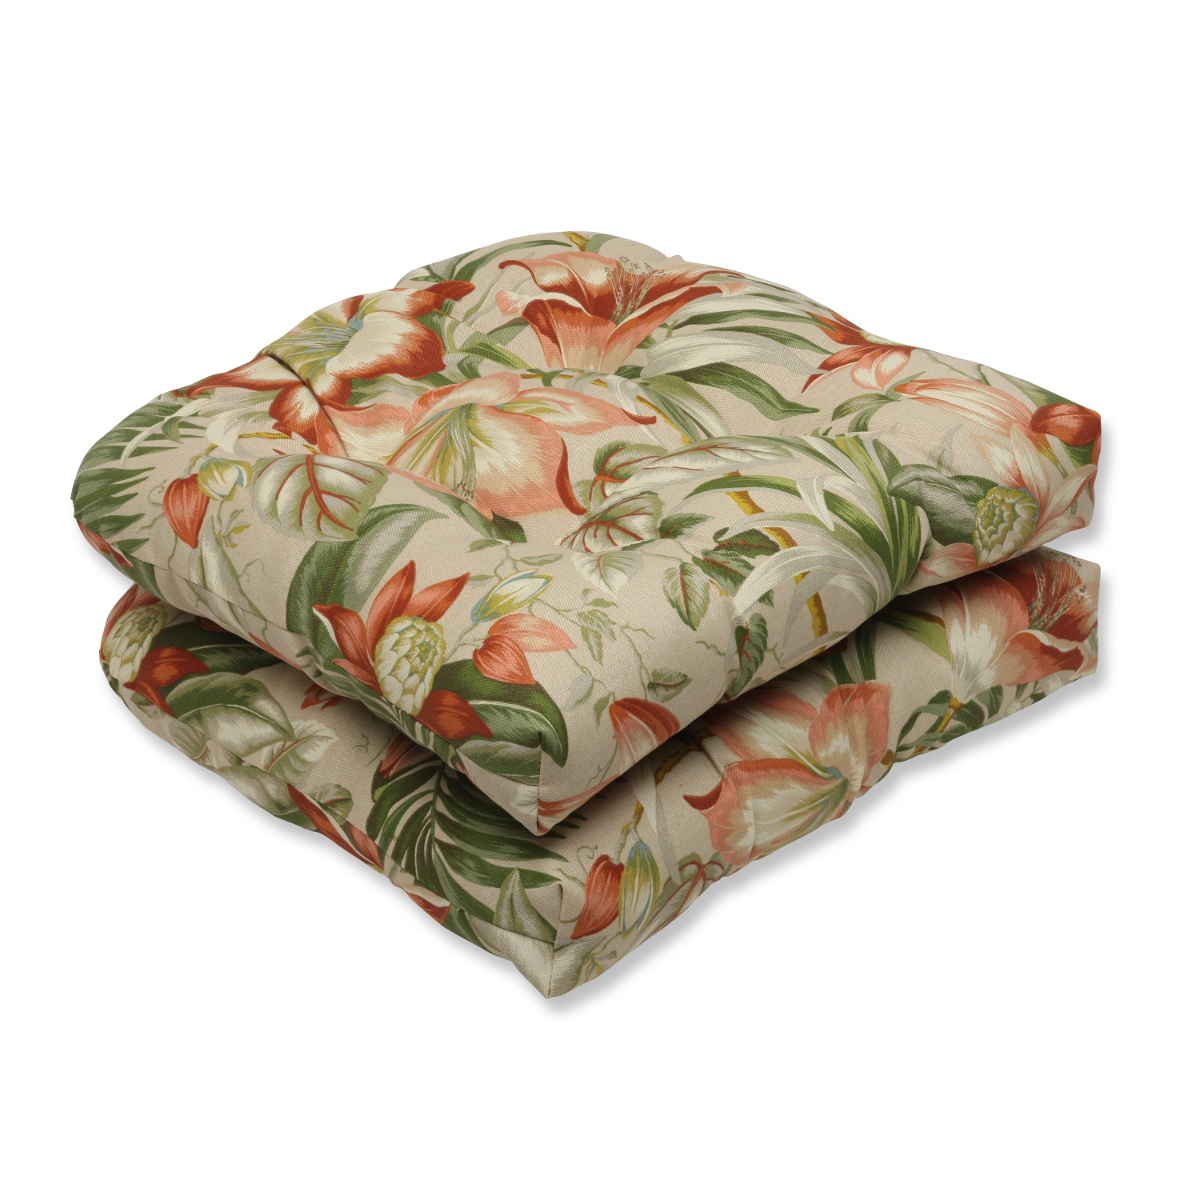 Pillow Perfect Set of 2 Green and Red Tropical Garden Outdoor Patio Rounded Seat Cushions 19"